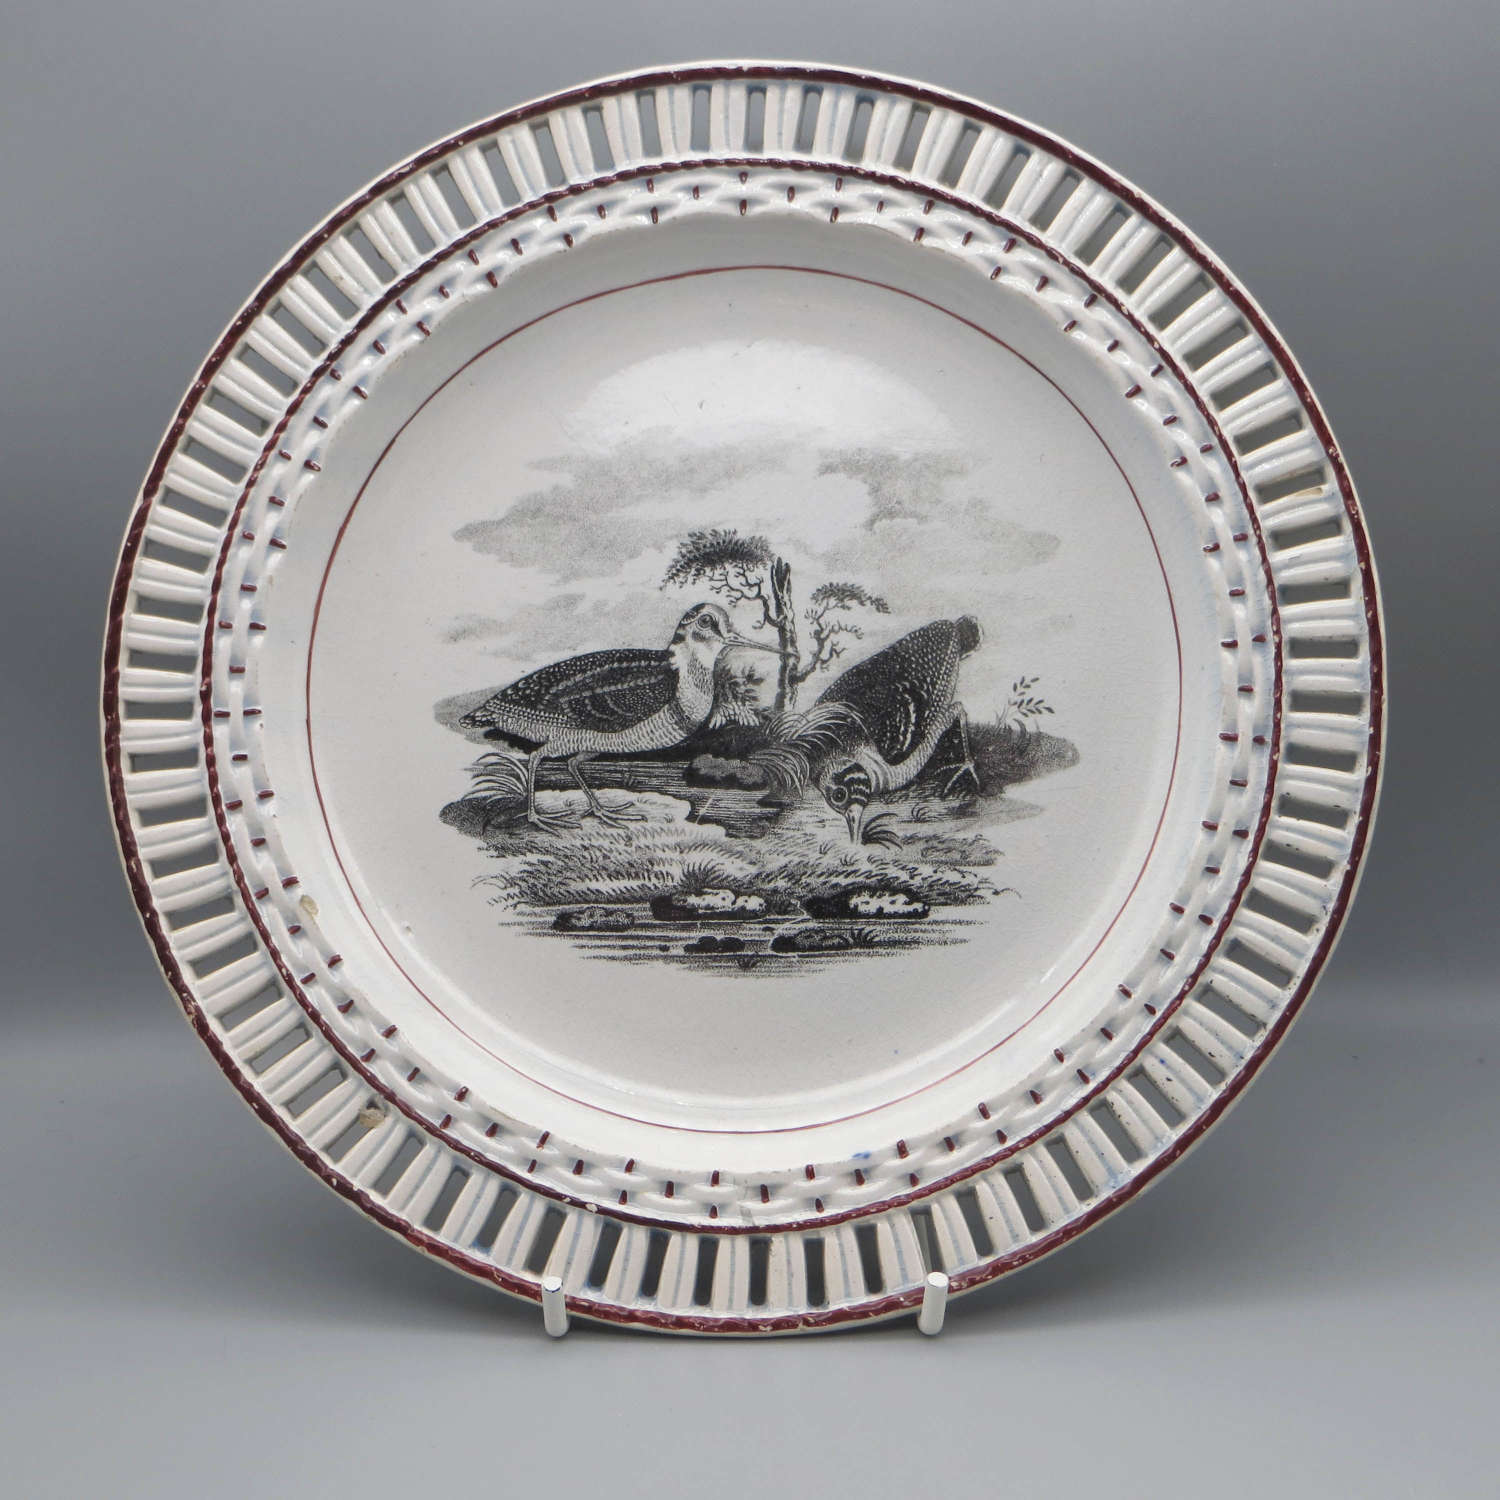 Pearlware plate with woodcock print